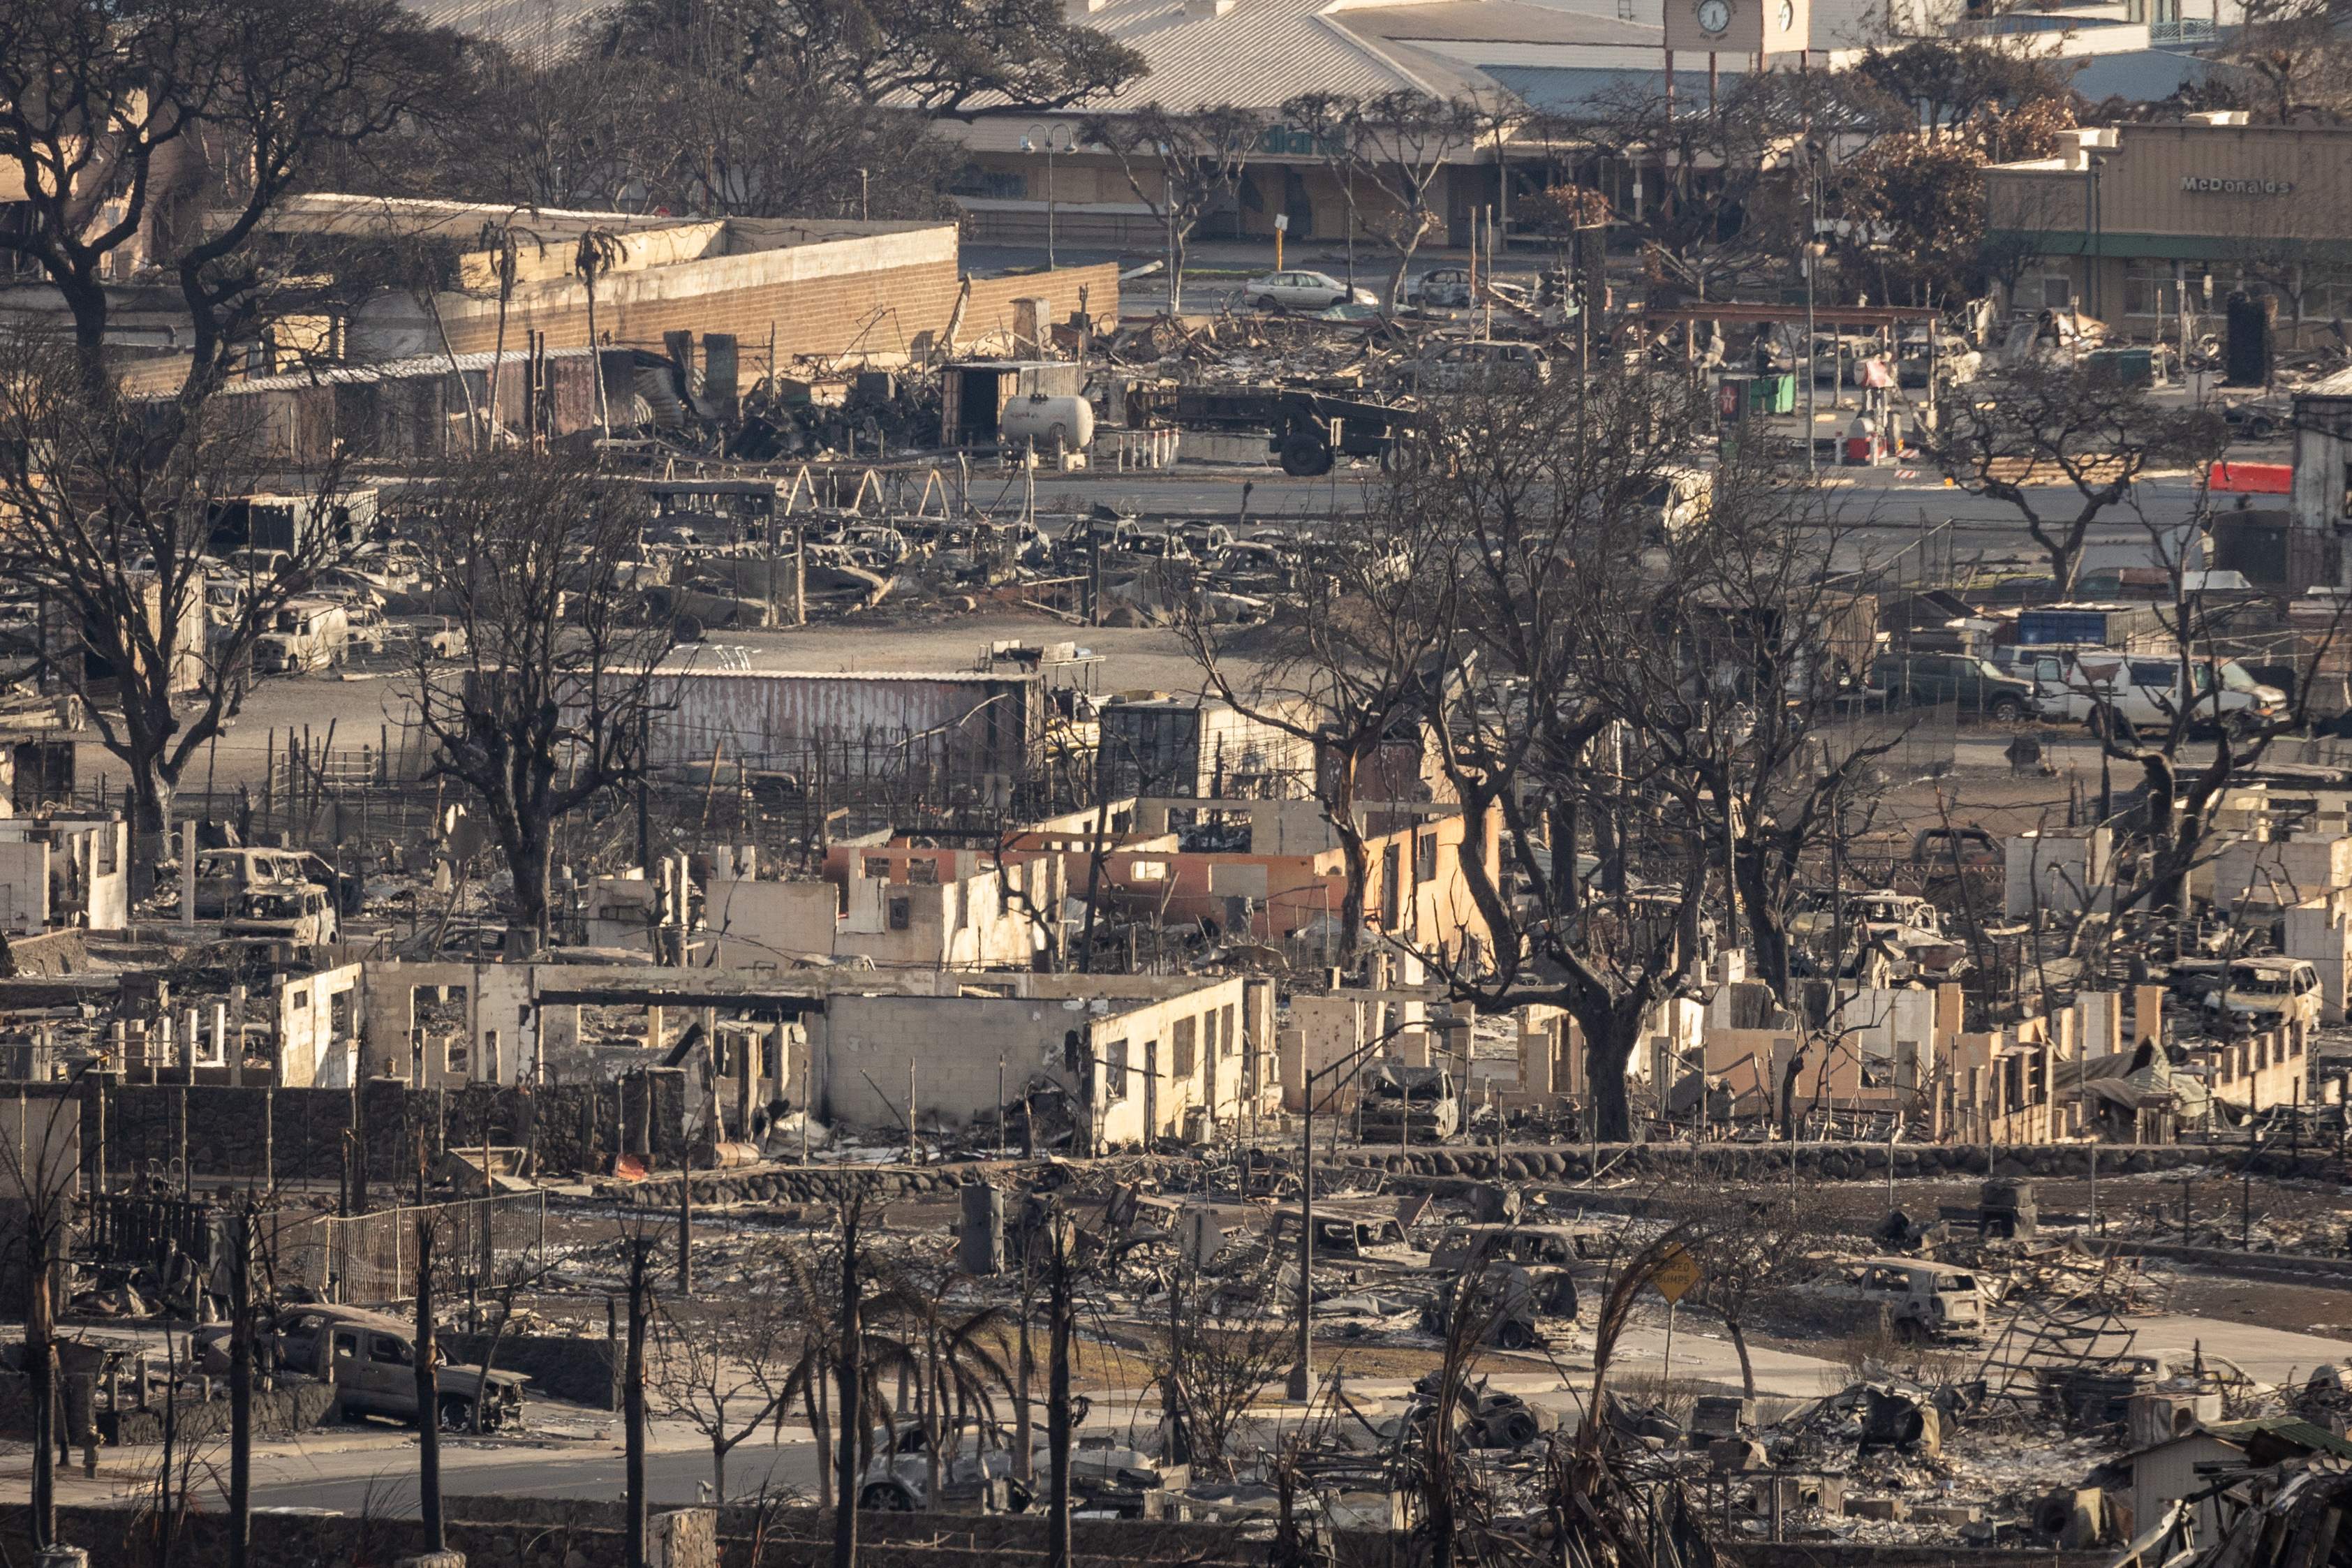 Charred remains of a burned neighbourhood is seen in the aftermath of a wildfire, in Lahaina, western Maui, Hawaii on August 14